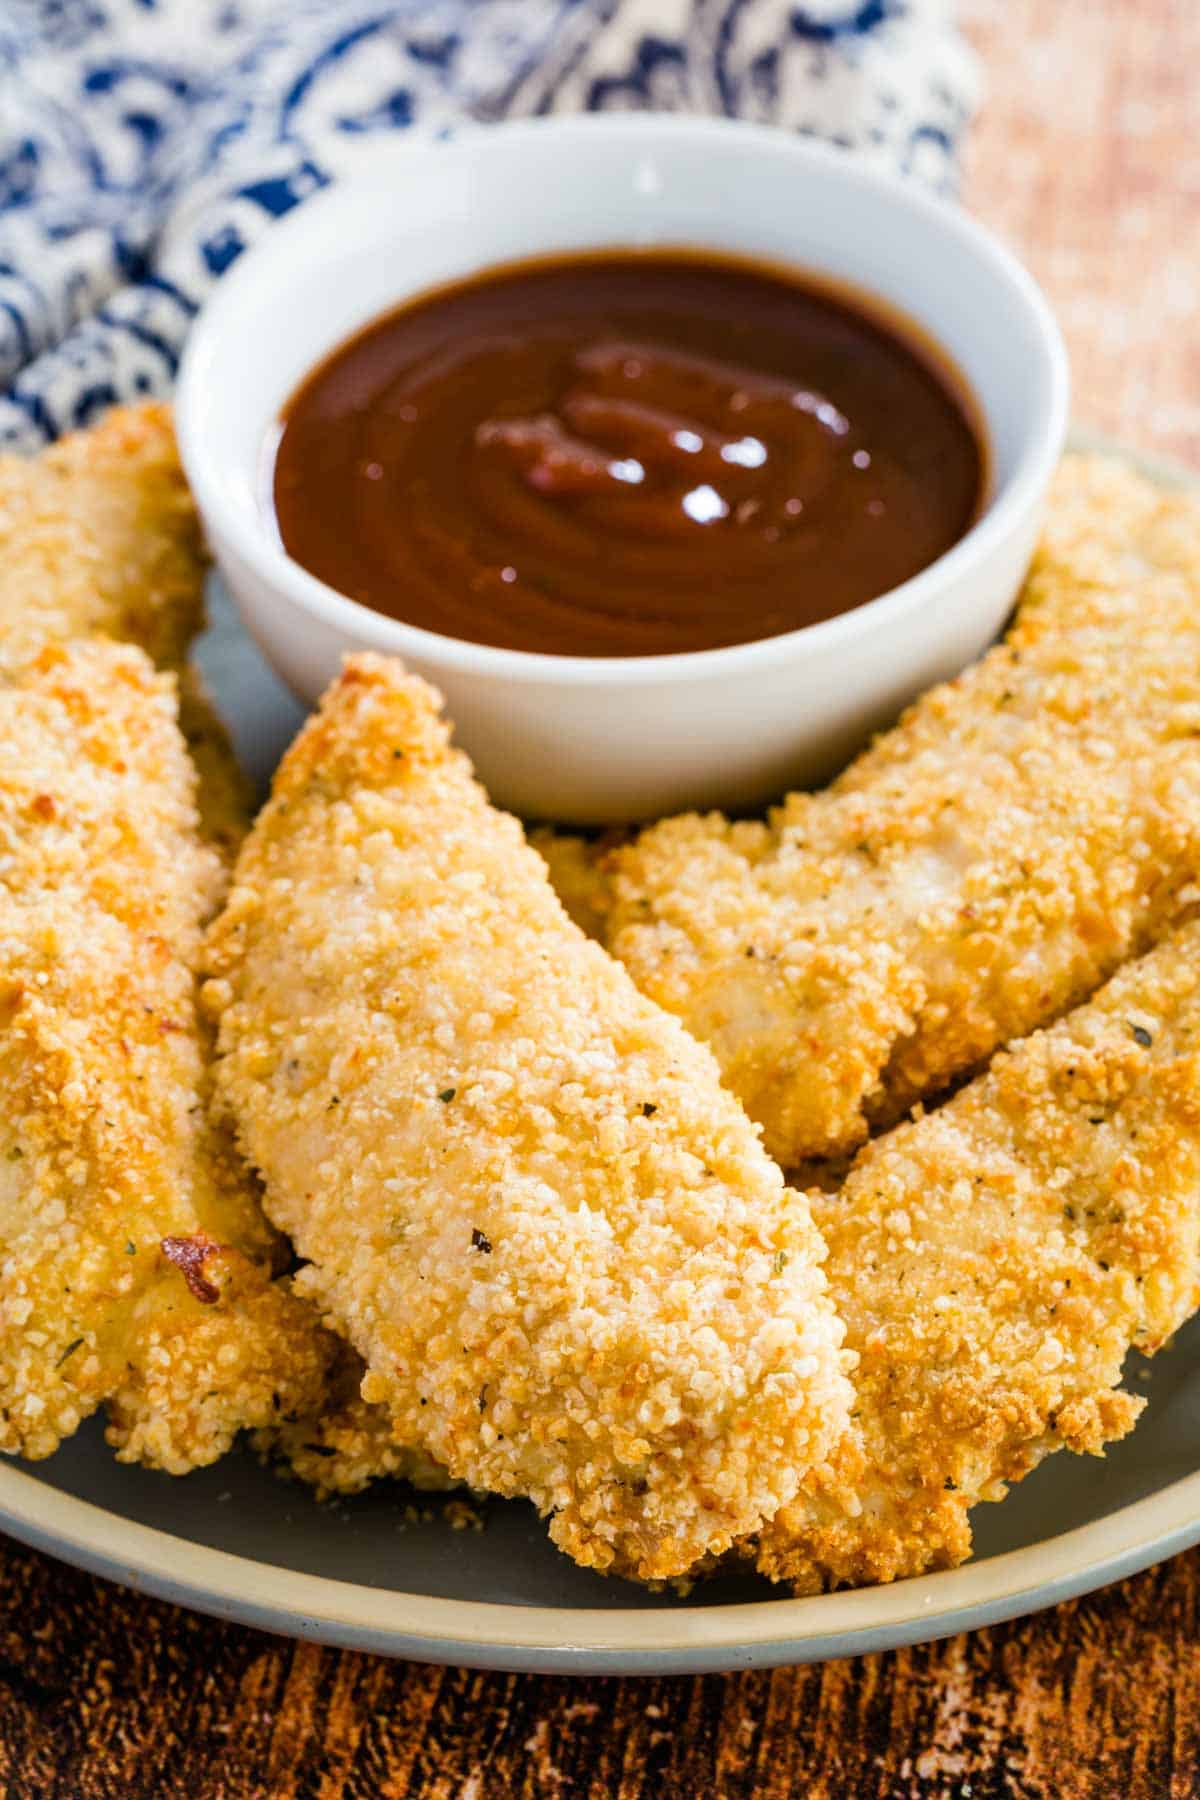 Gluten-free chicken tenders on a plate, surrounding a dish of ketchup for dipping.